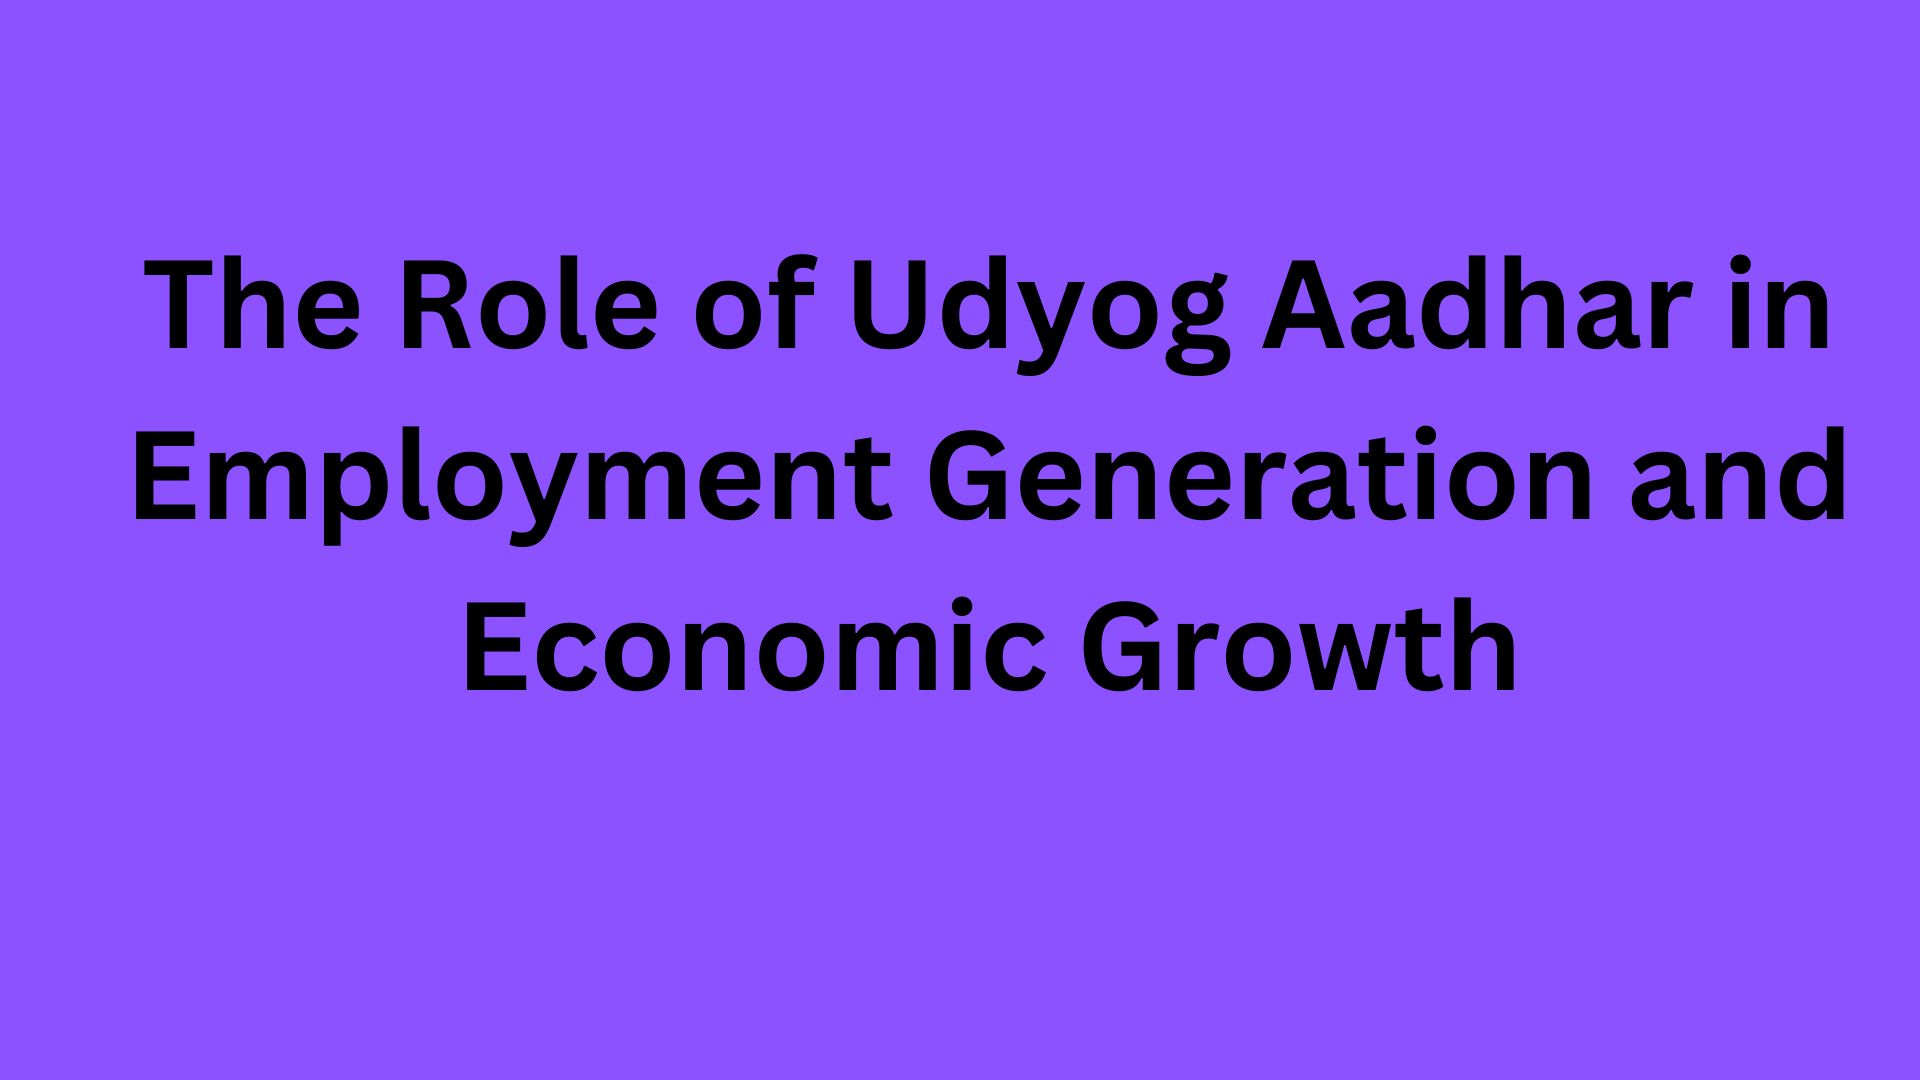 The Role of Udyog Aadhar in Employment Generation and Economic Growth